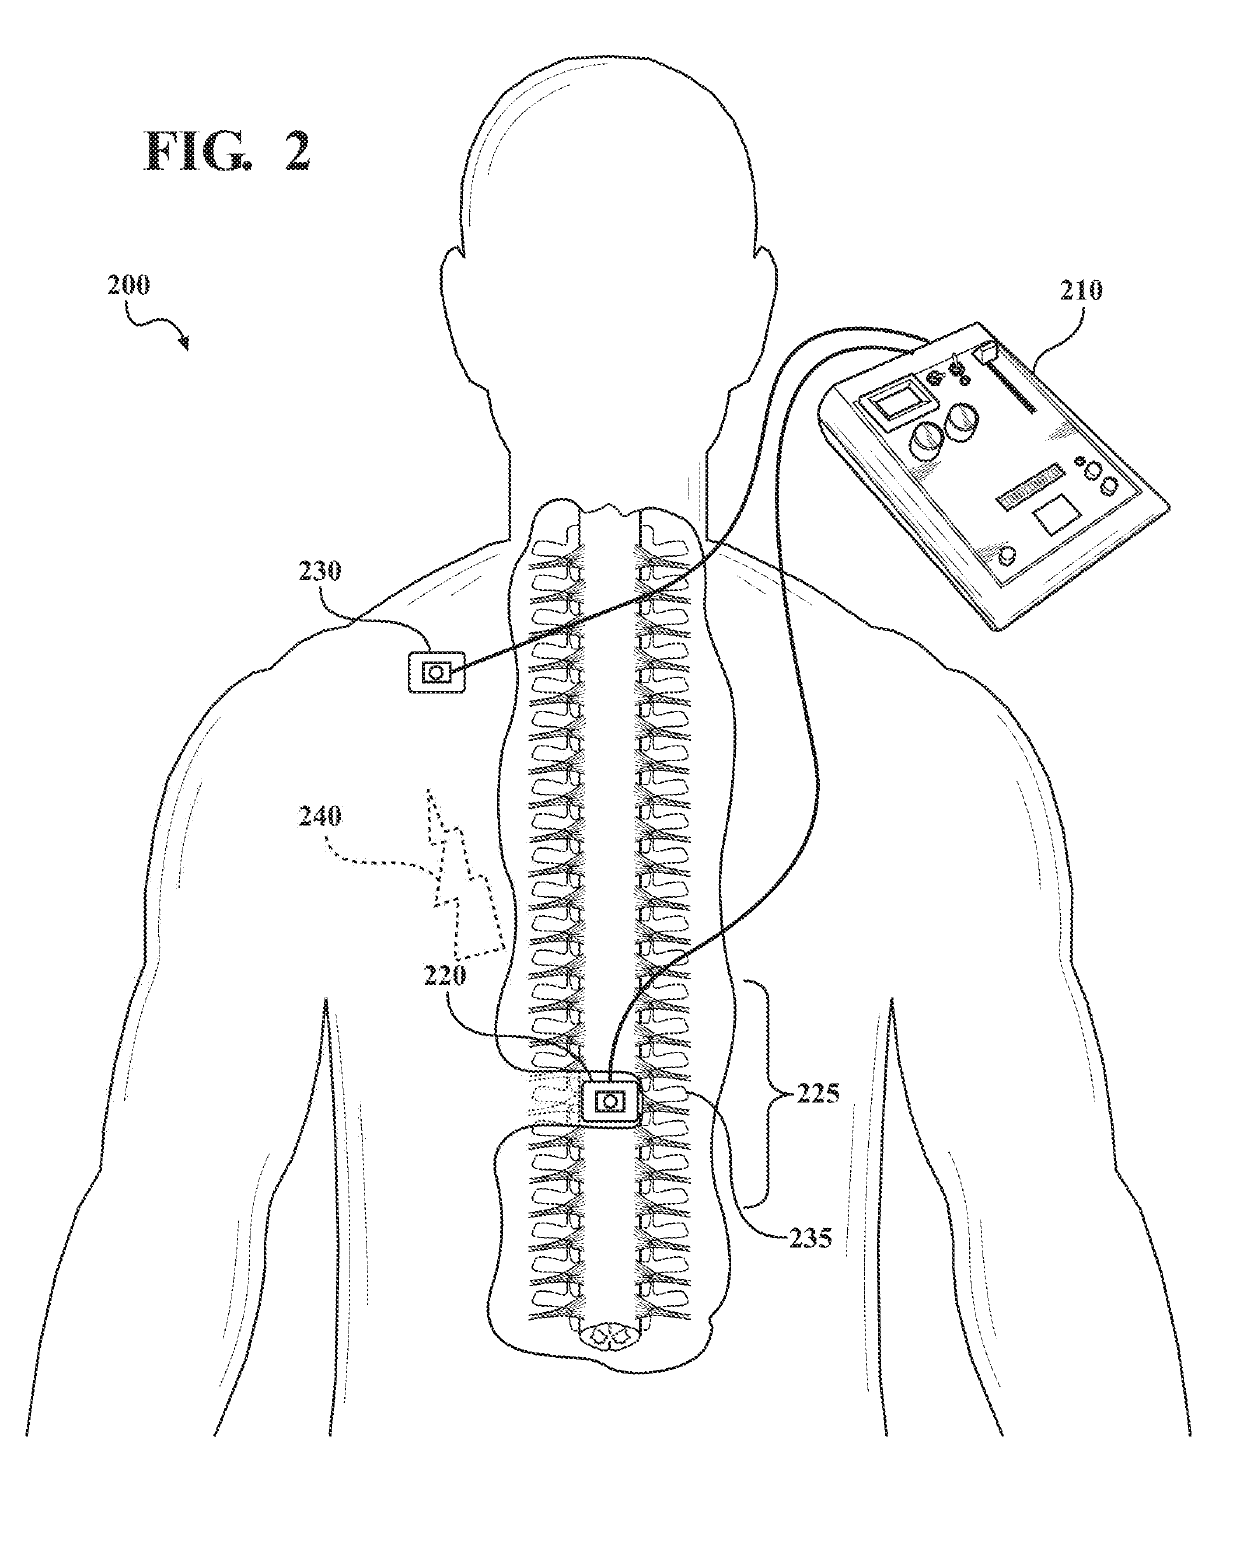 Transcutaneous spinal cord stimulation for treatment of psychiatric disorders